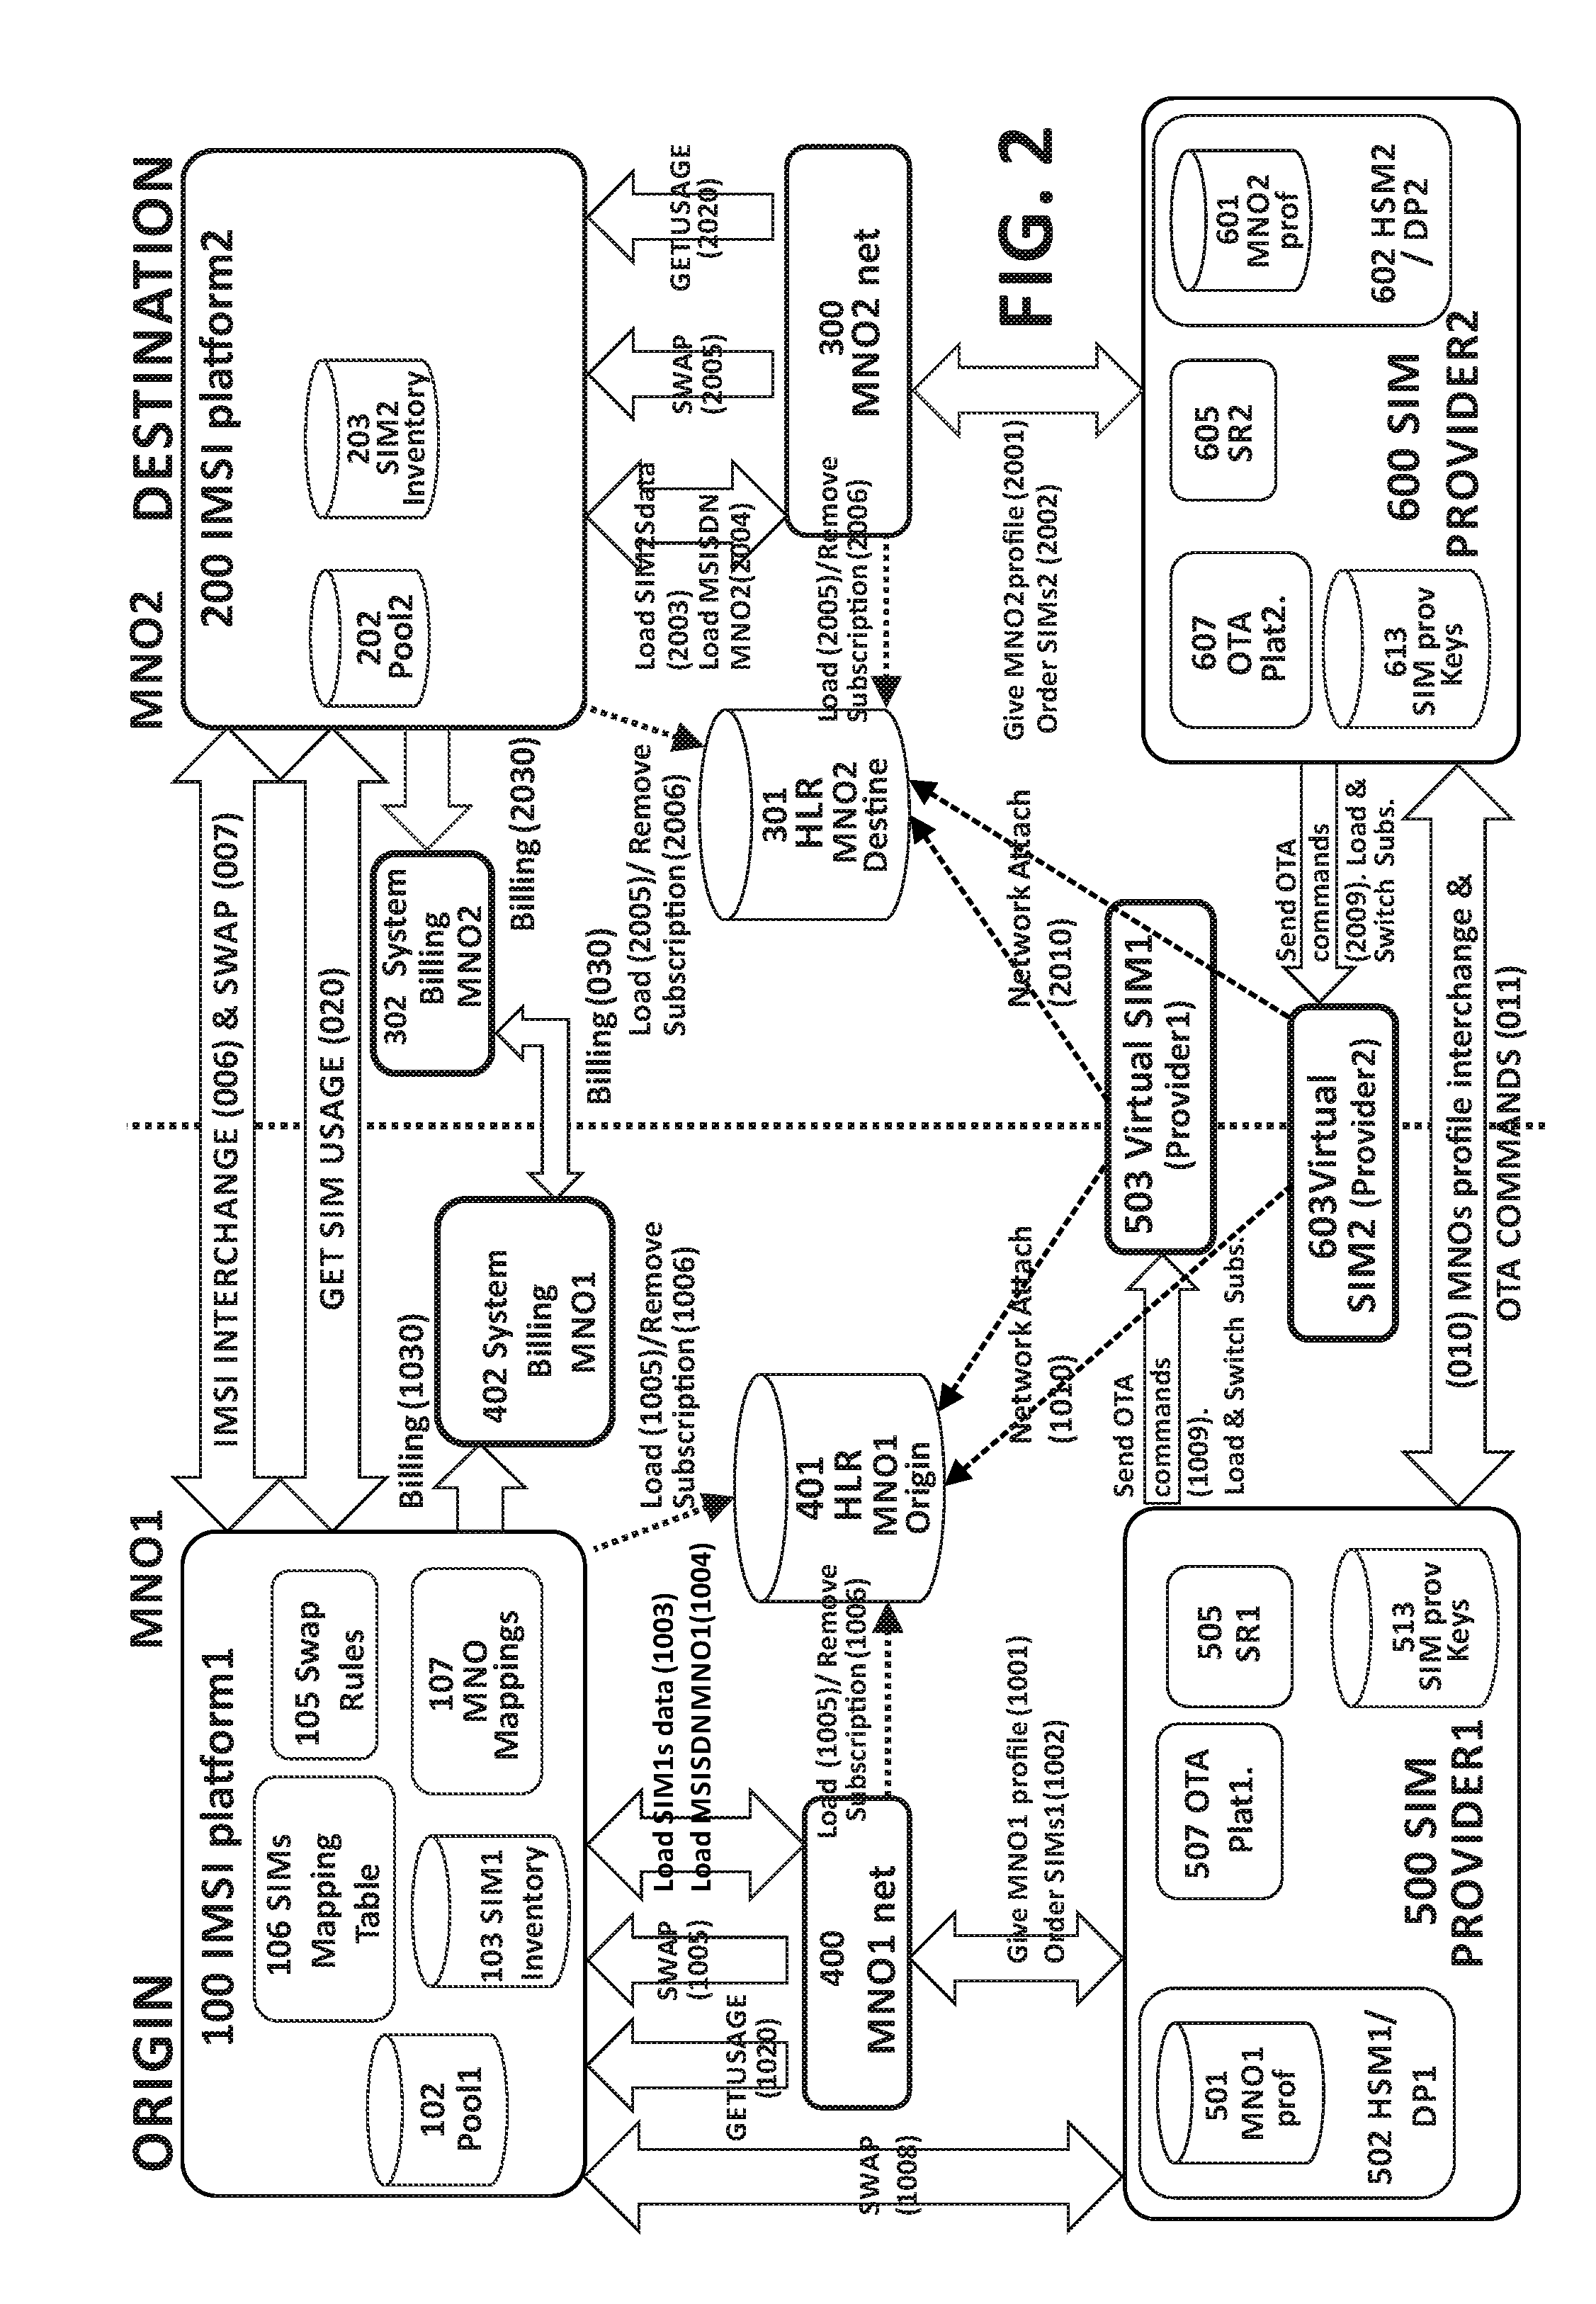 Method and System for Dynamic Managing of Subscriber Devices in Mobile Networks